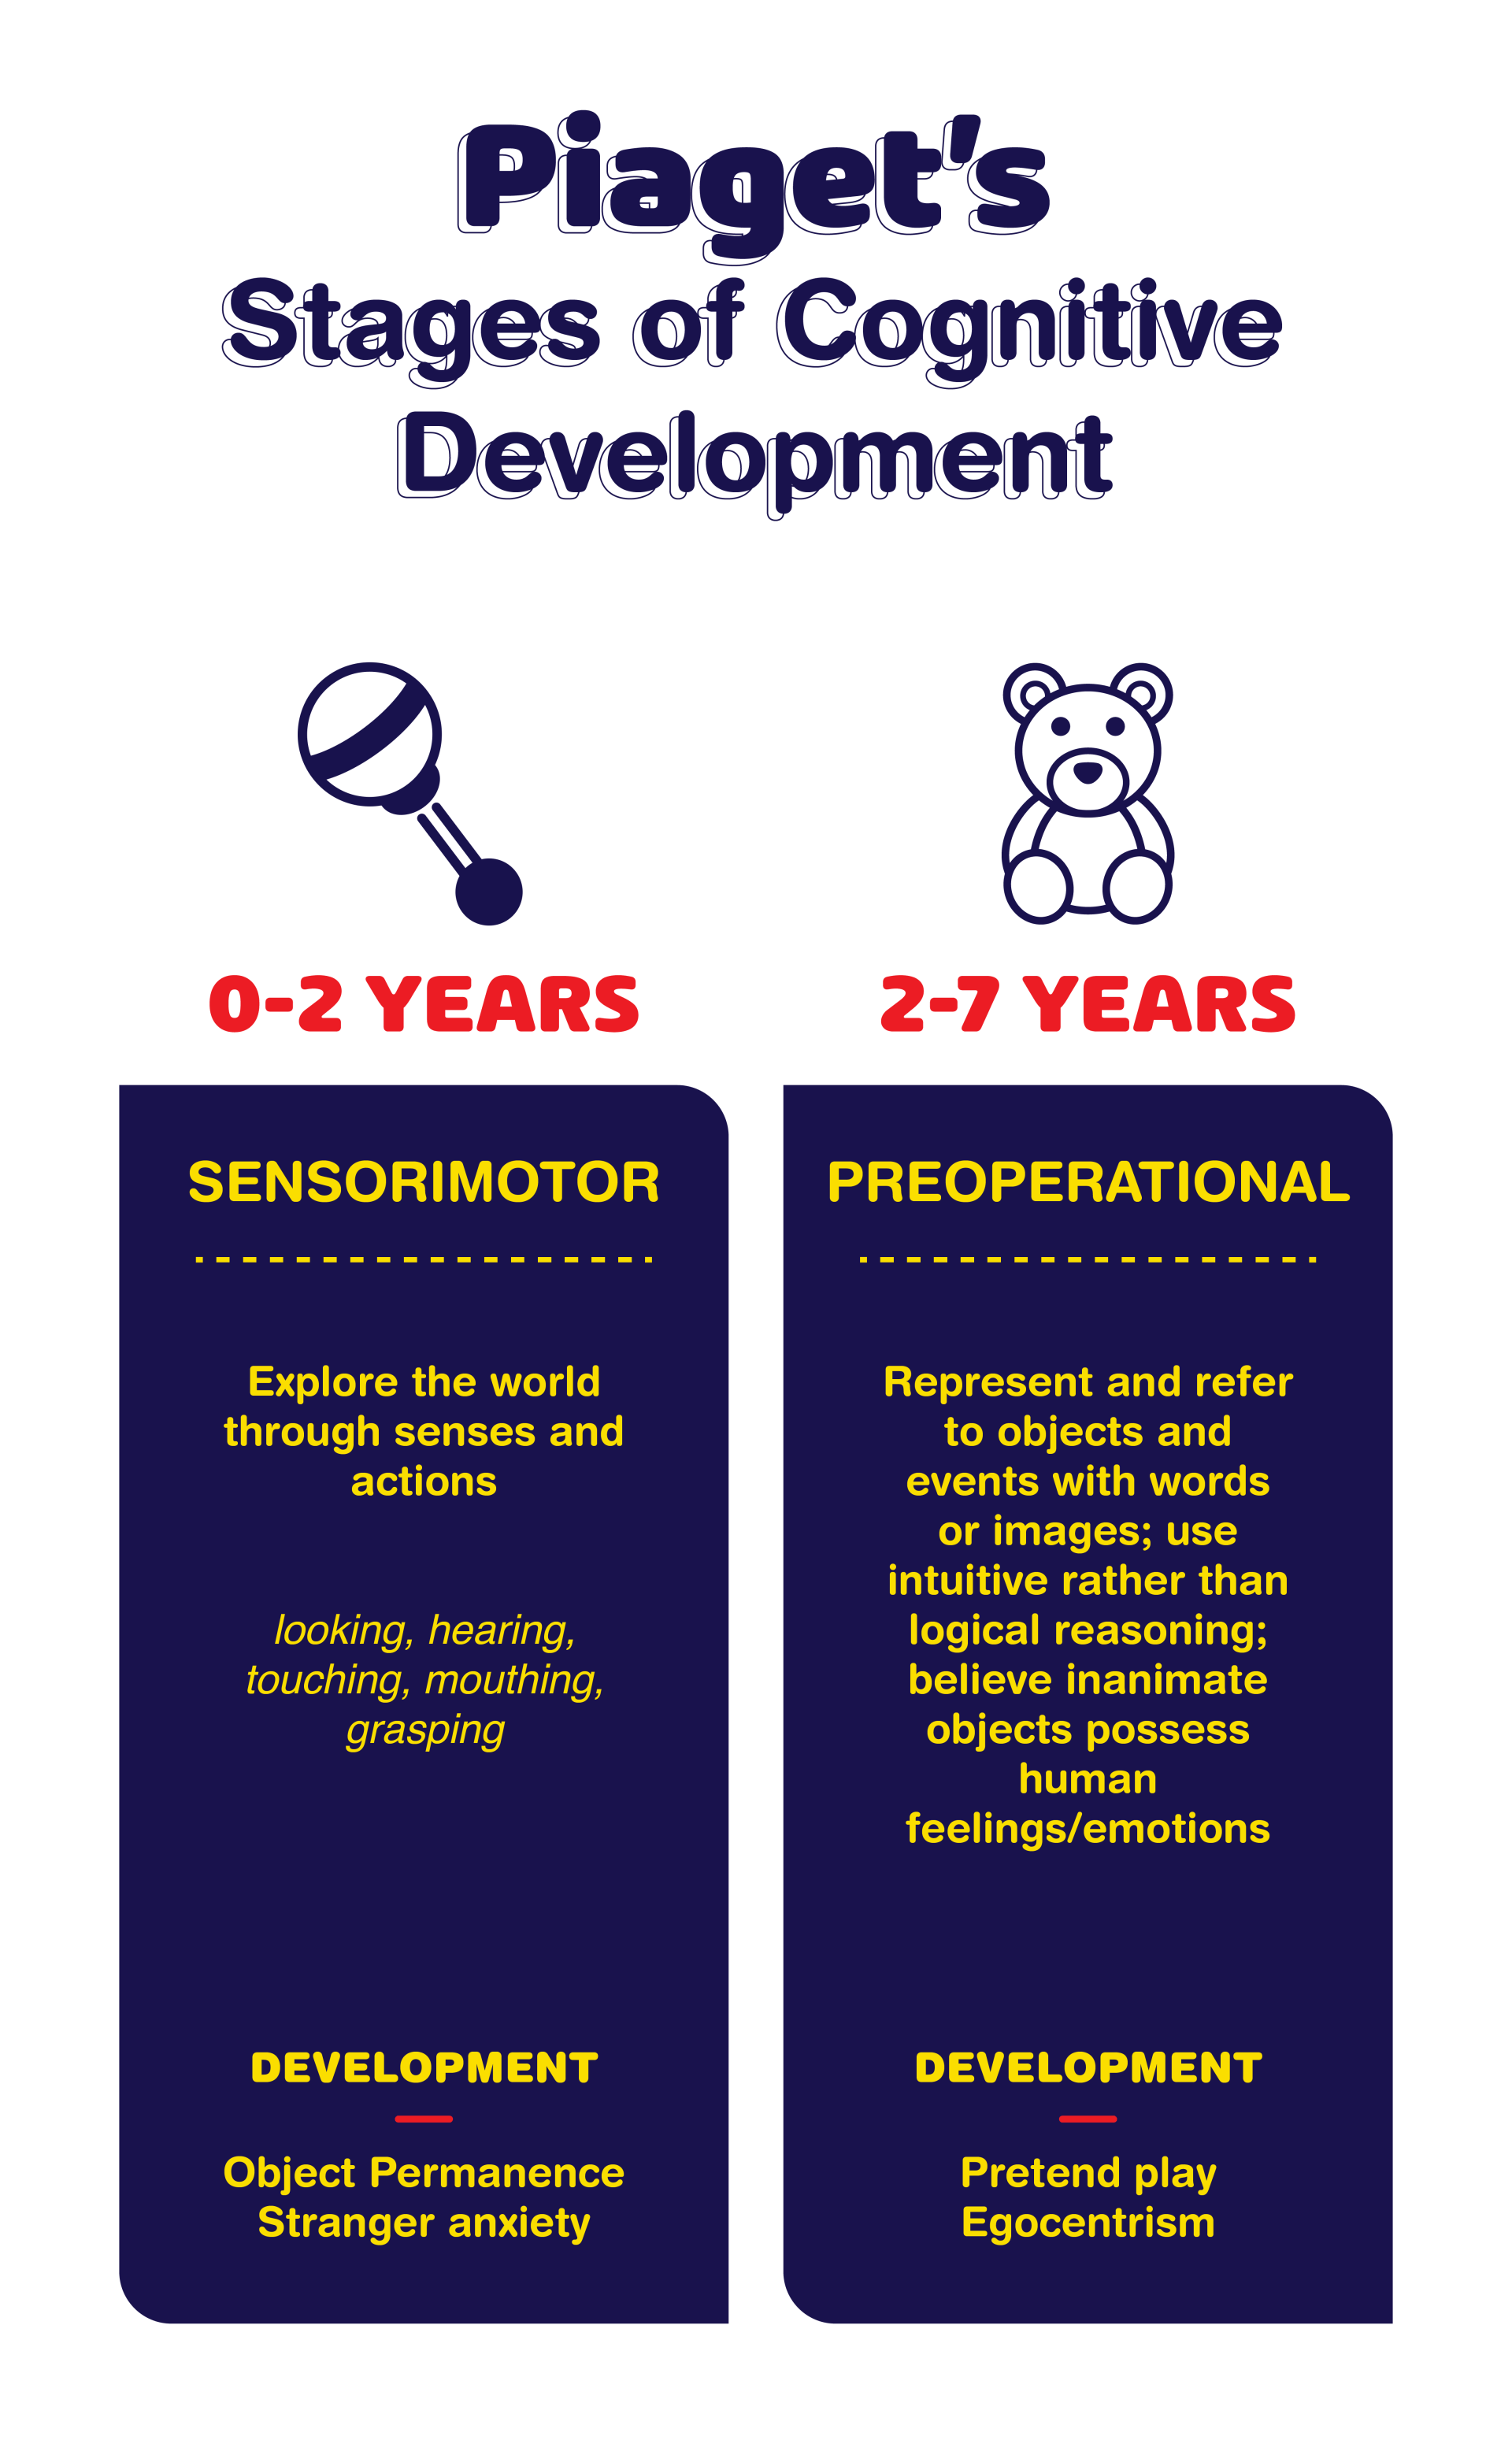 Piaget's Stages of Cognitive Development